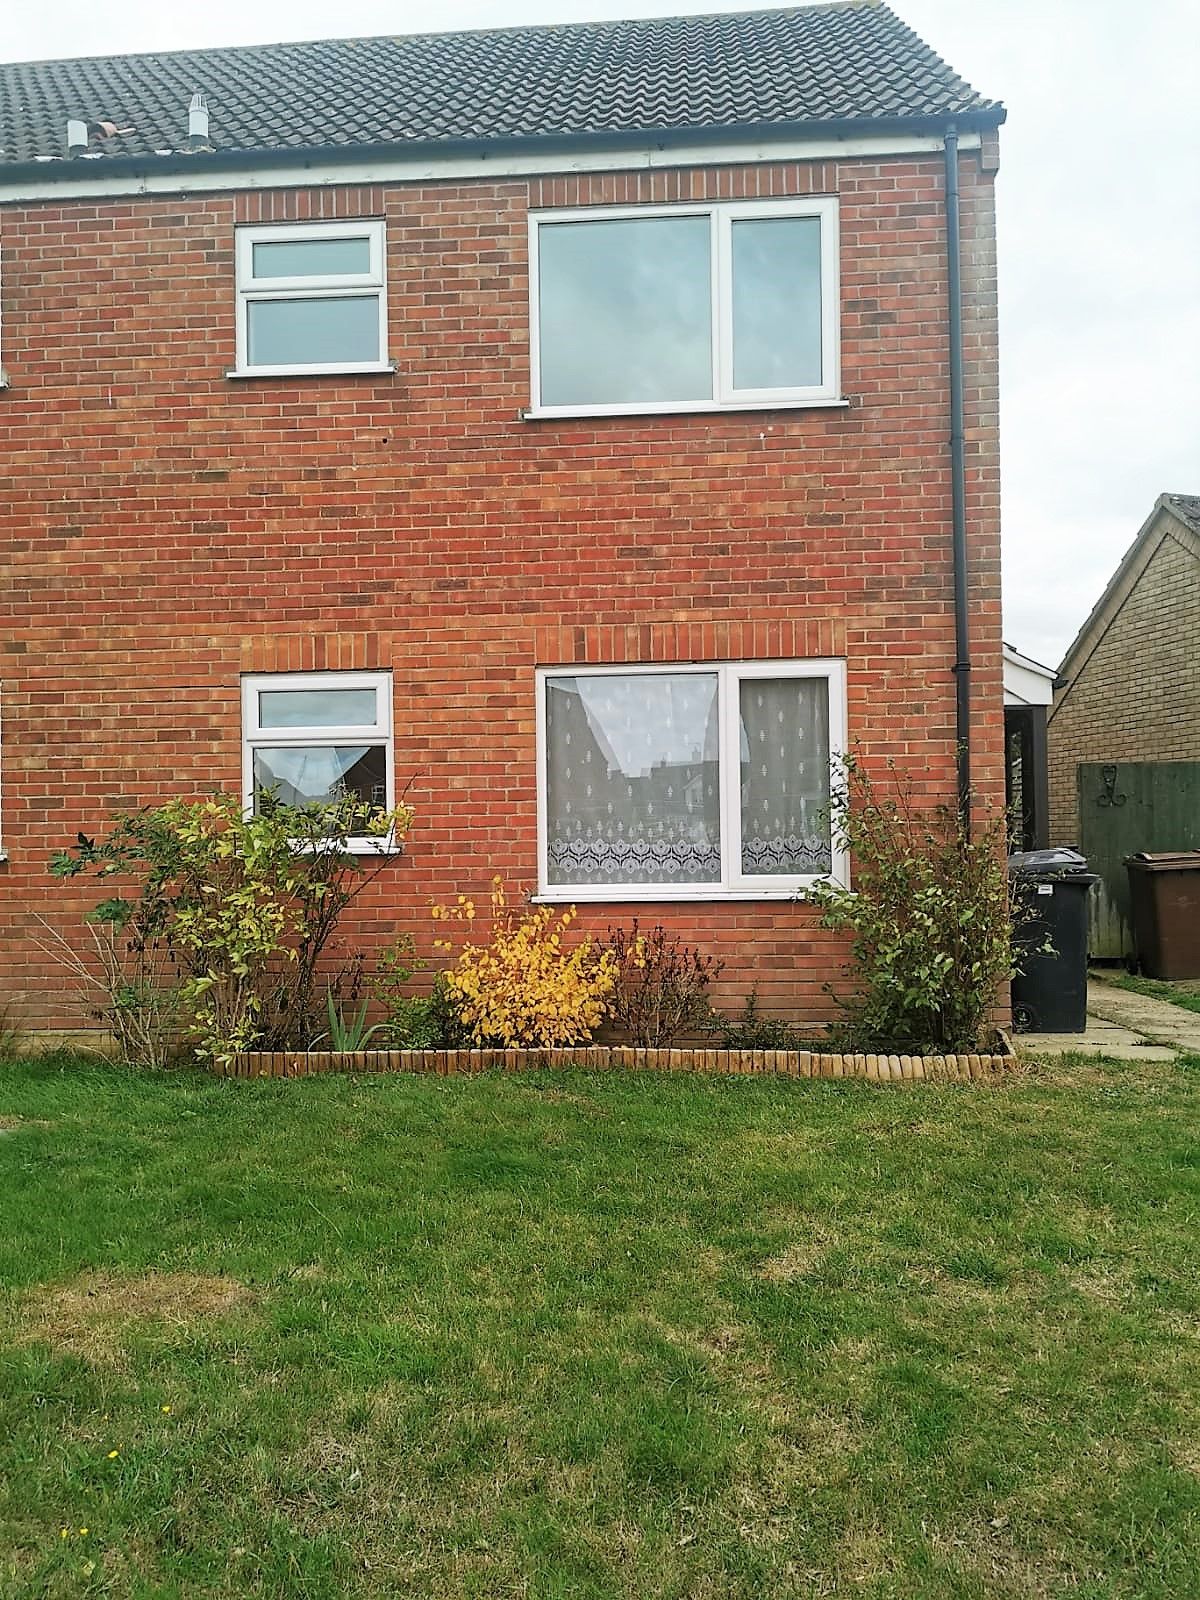 1 bed semi detached house to rent in Pavilion Court Roydon IP22 Zoopla